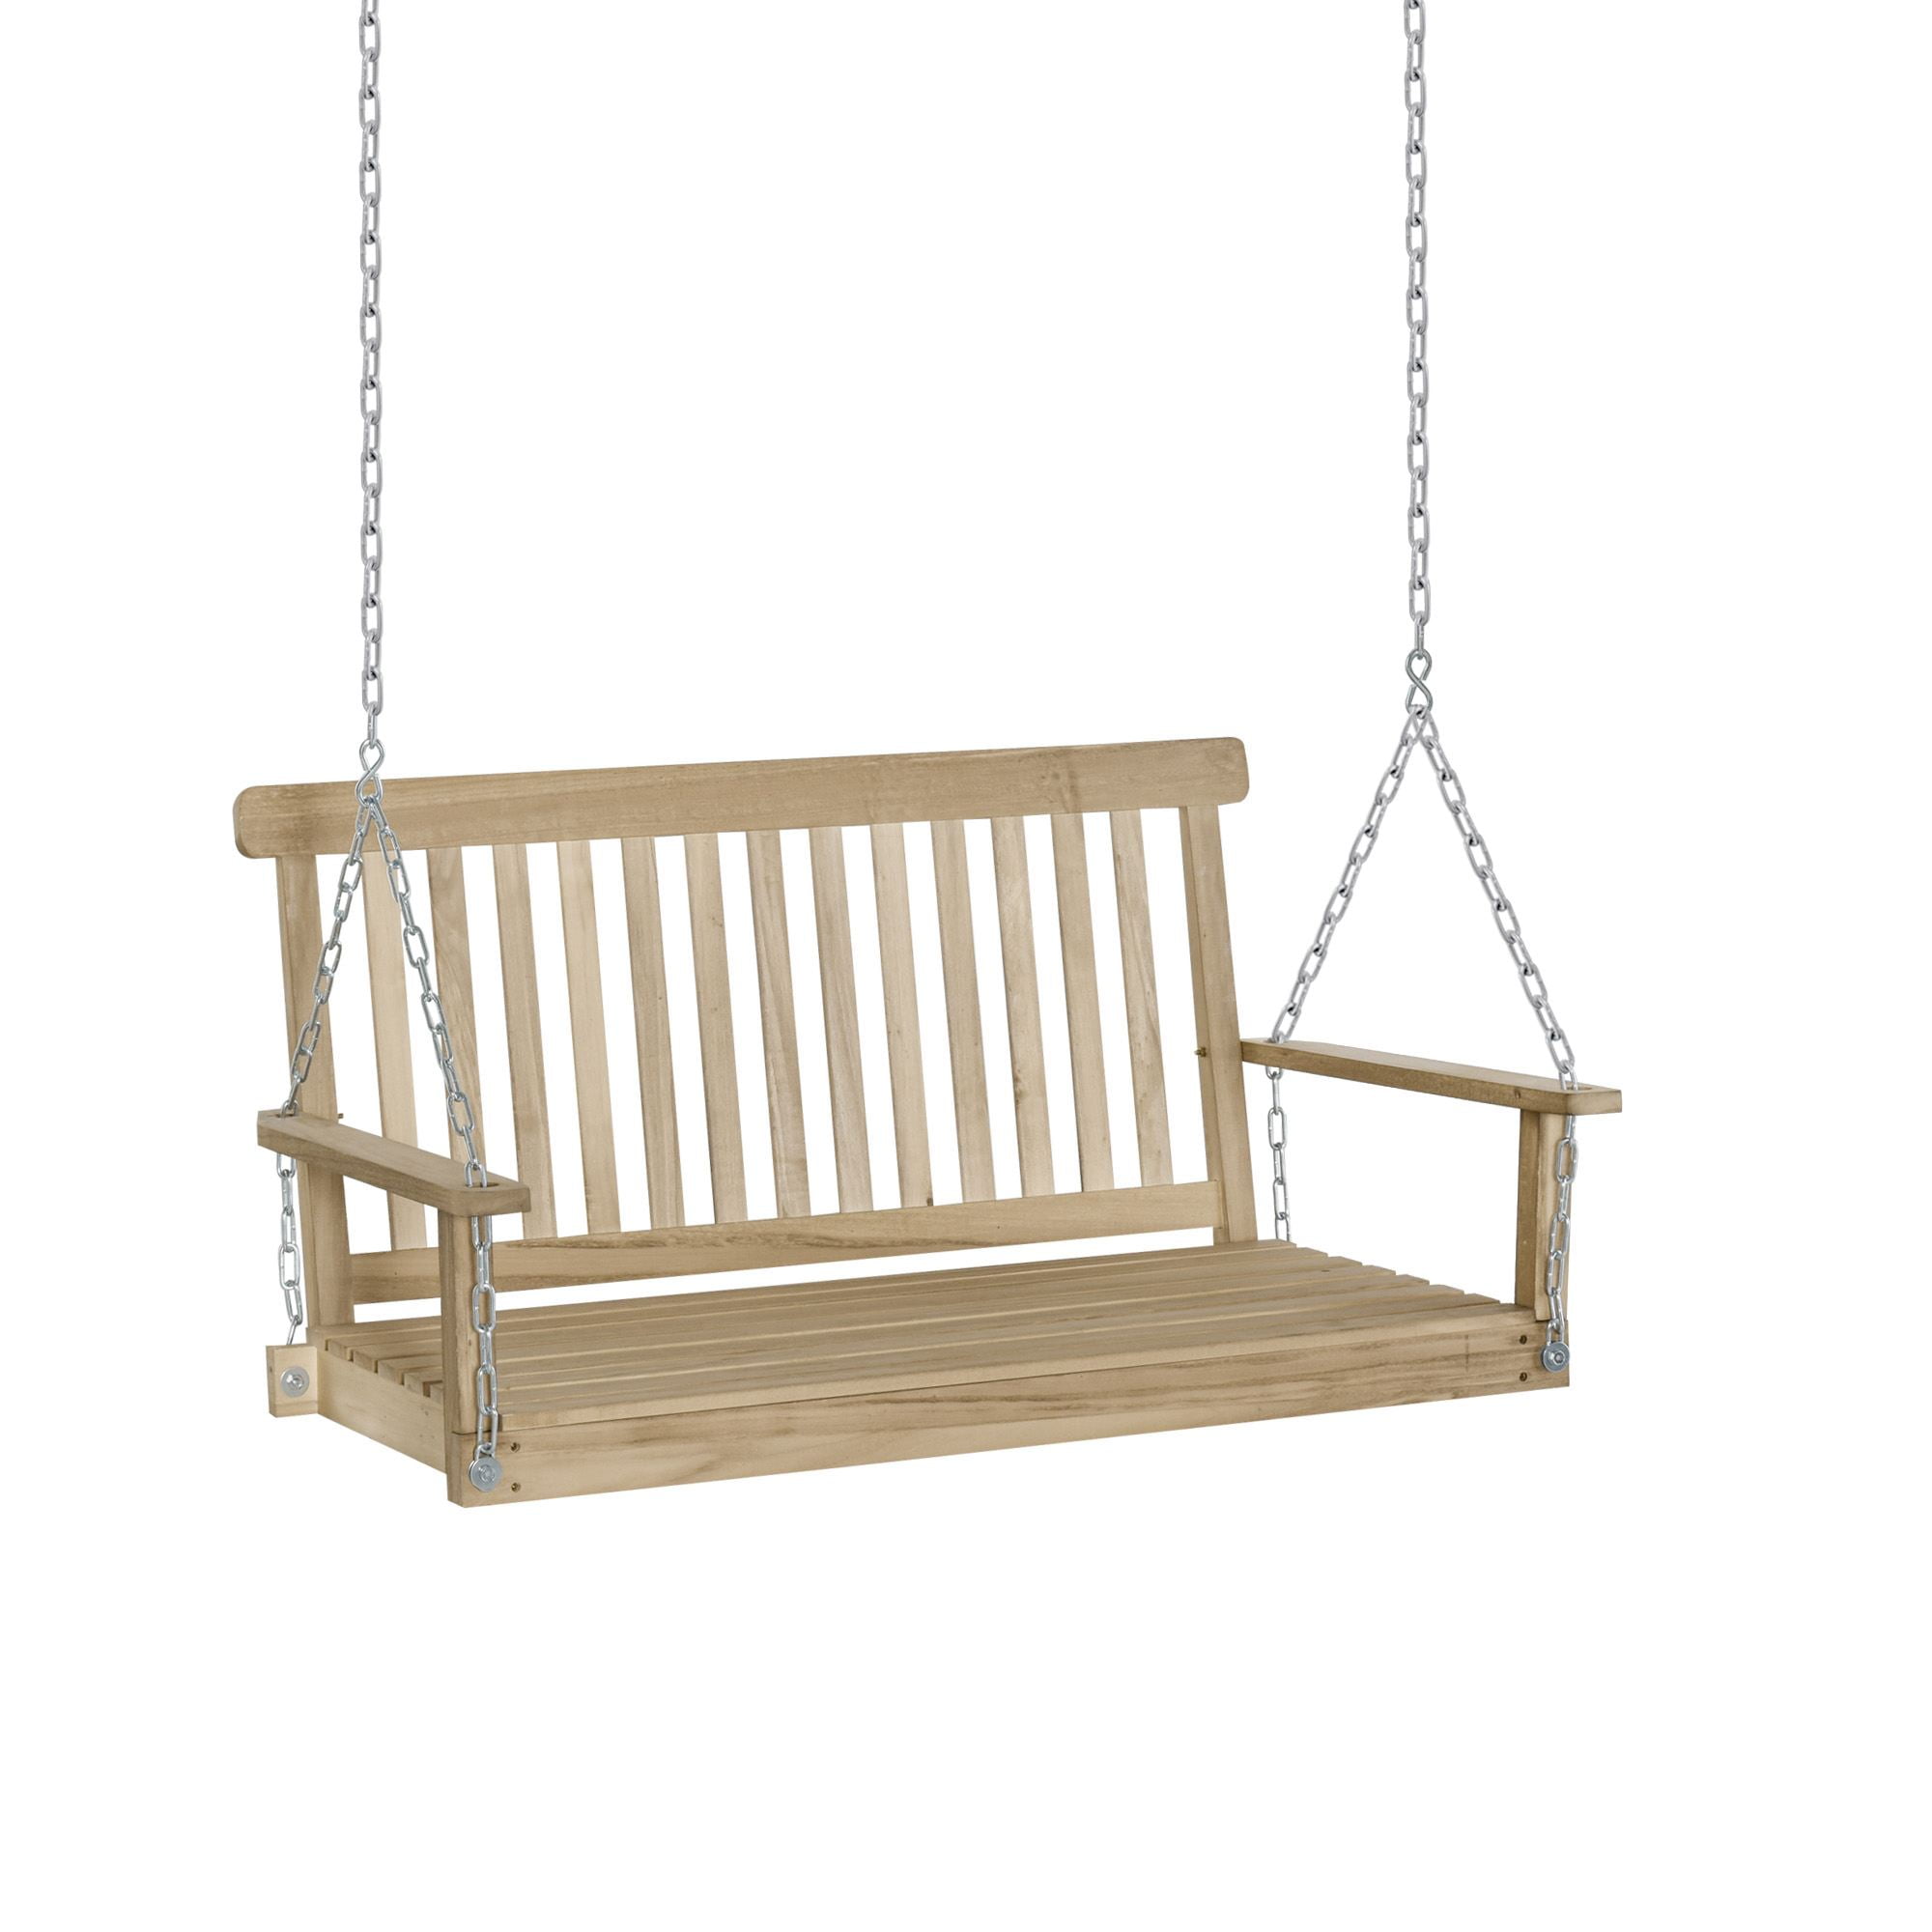 Black & Chains Included Outsunny 46 2-Person Outdoor Porch Swing Bench with Solid Wood Design Southern Style 440 lb Weight Capacity